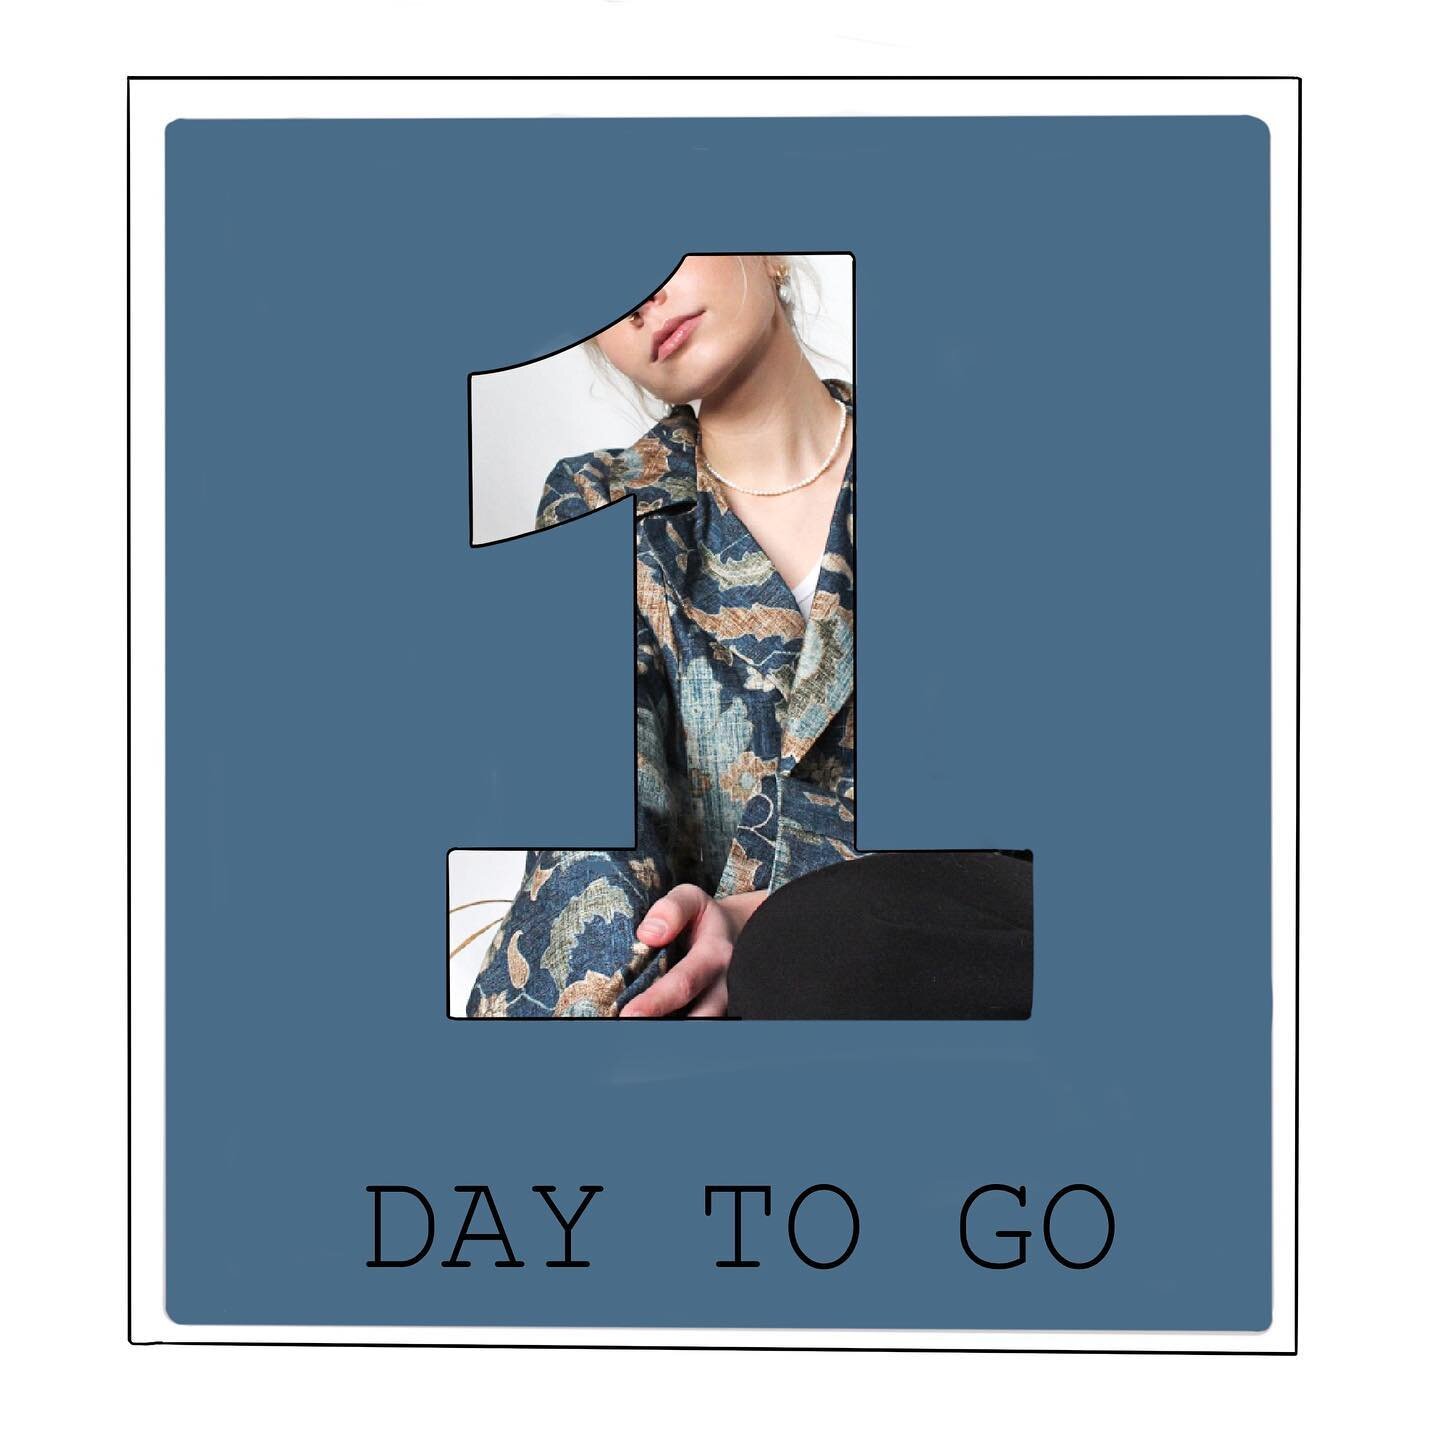 Tomorrow is the day 🎉🎉 7pm ✨🫣
&bull;
&bull;
&bull;
#fashiondesigner #fashiondesign #fashionstyle #fashionblog #instafashion #ootd #style #instablog #fashionphotography #girlboss #girlbosslife #suits #sustainablefashion #upcycled #smallbusiness #sm